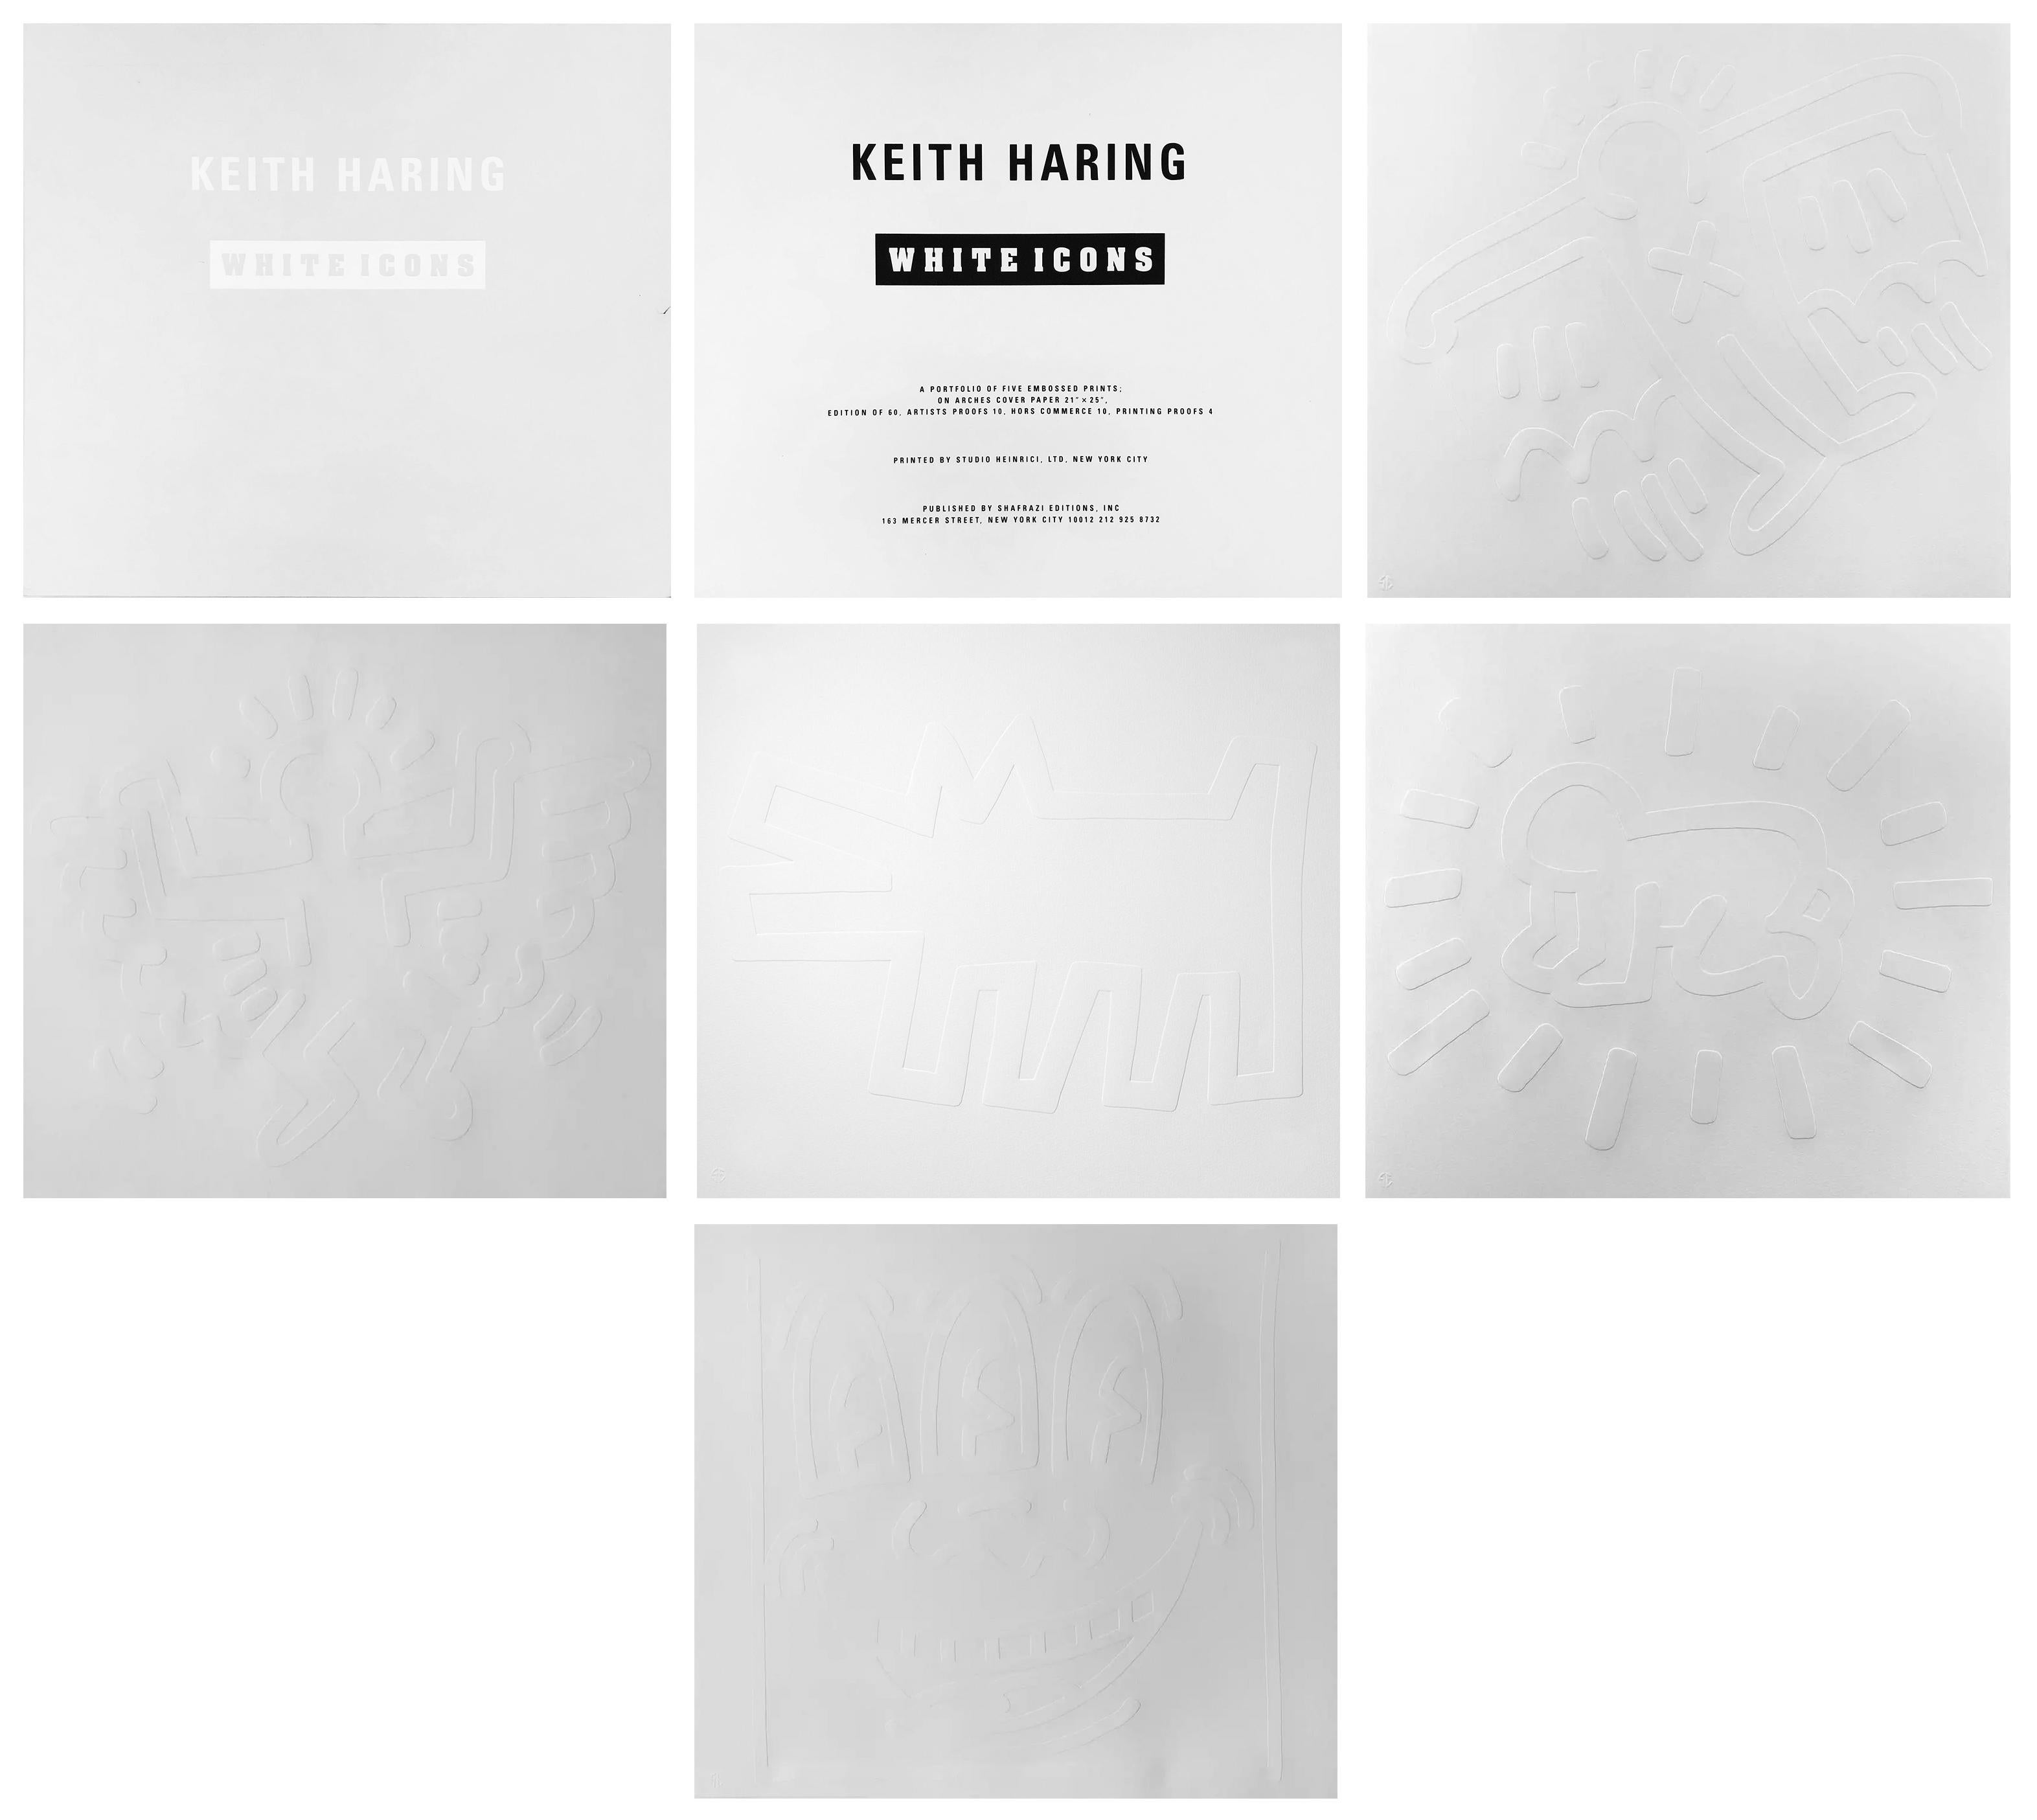 WHITE ICONS (COMPLETE SERIES OF 5)